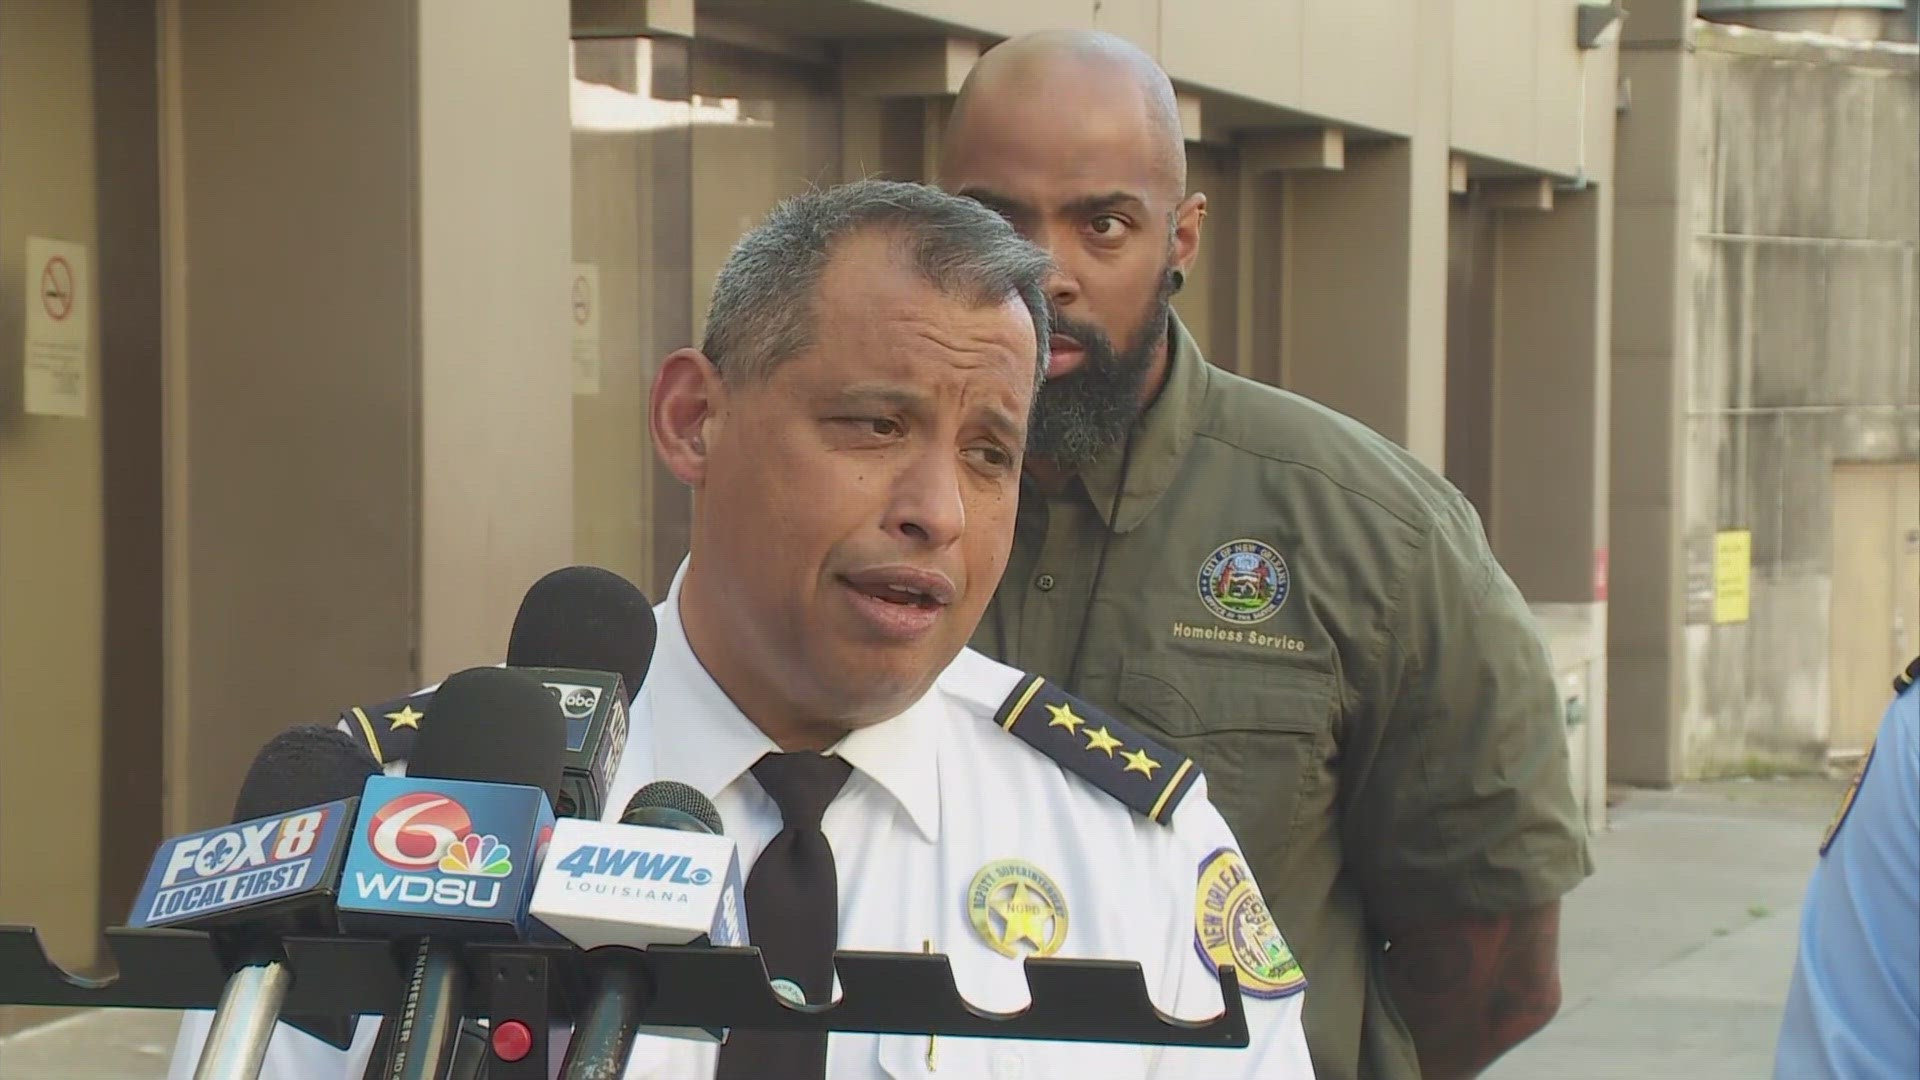 NOPD gives update on homeless shelter shooting